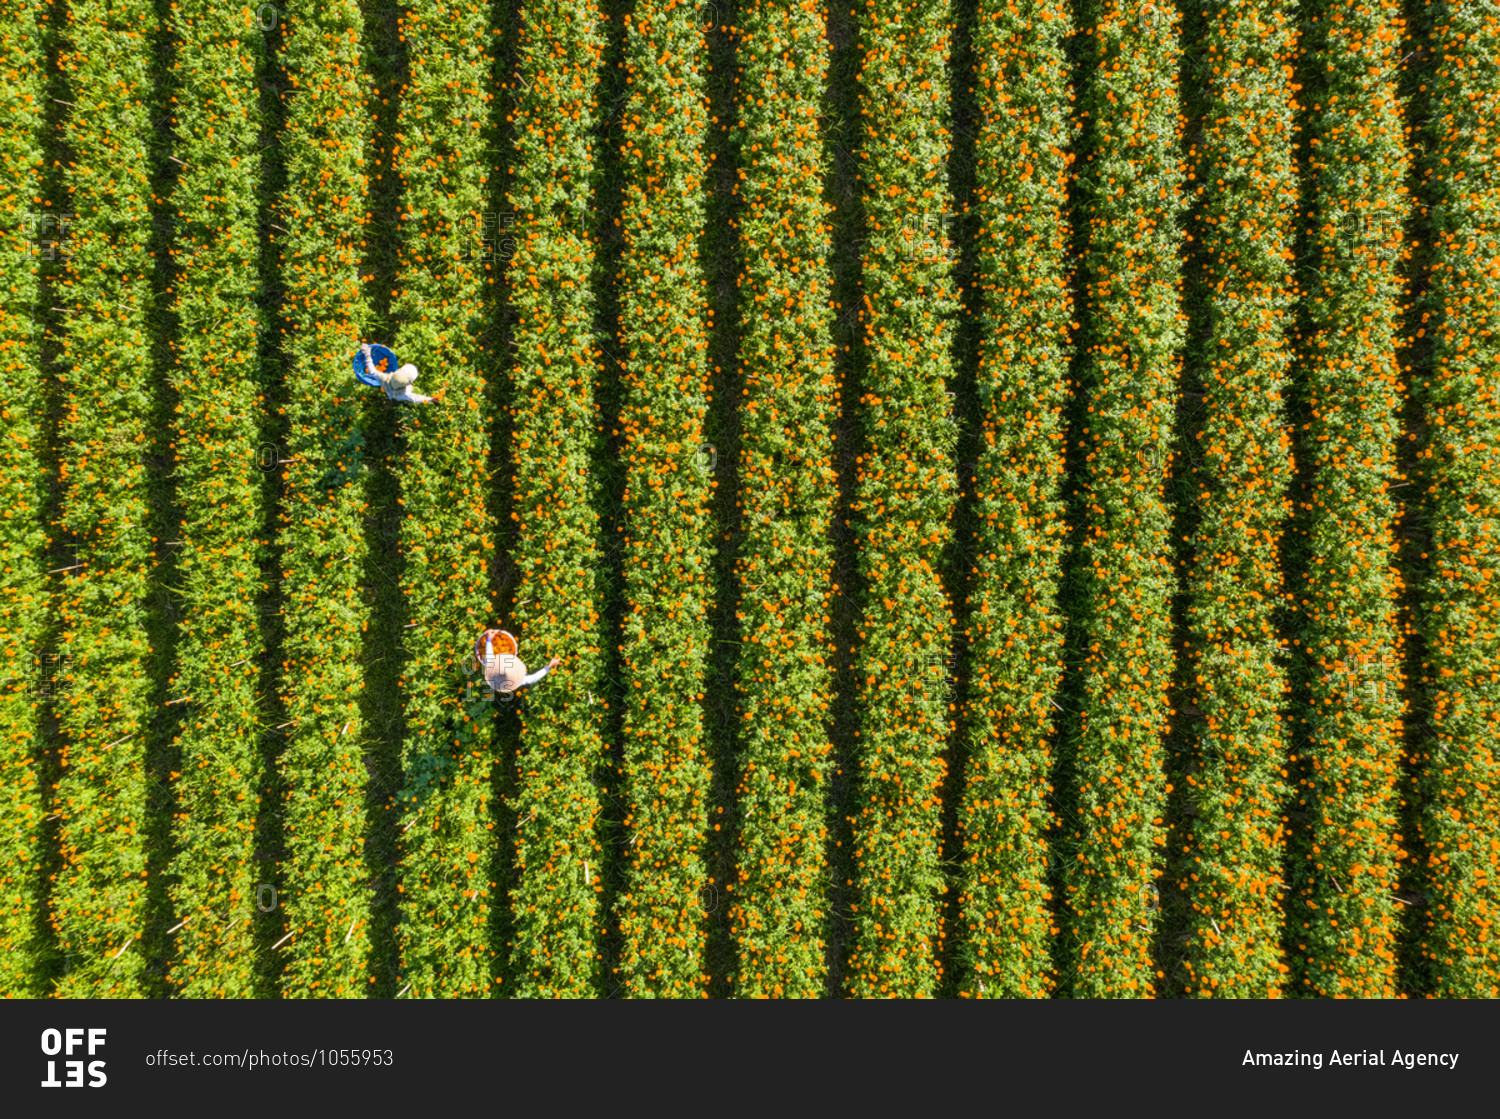 Aerial View Workers picking Marigold flowers in baskets, Bali, Indonesia.